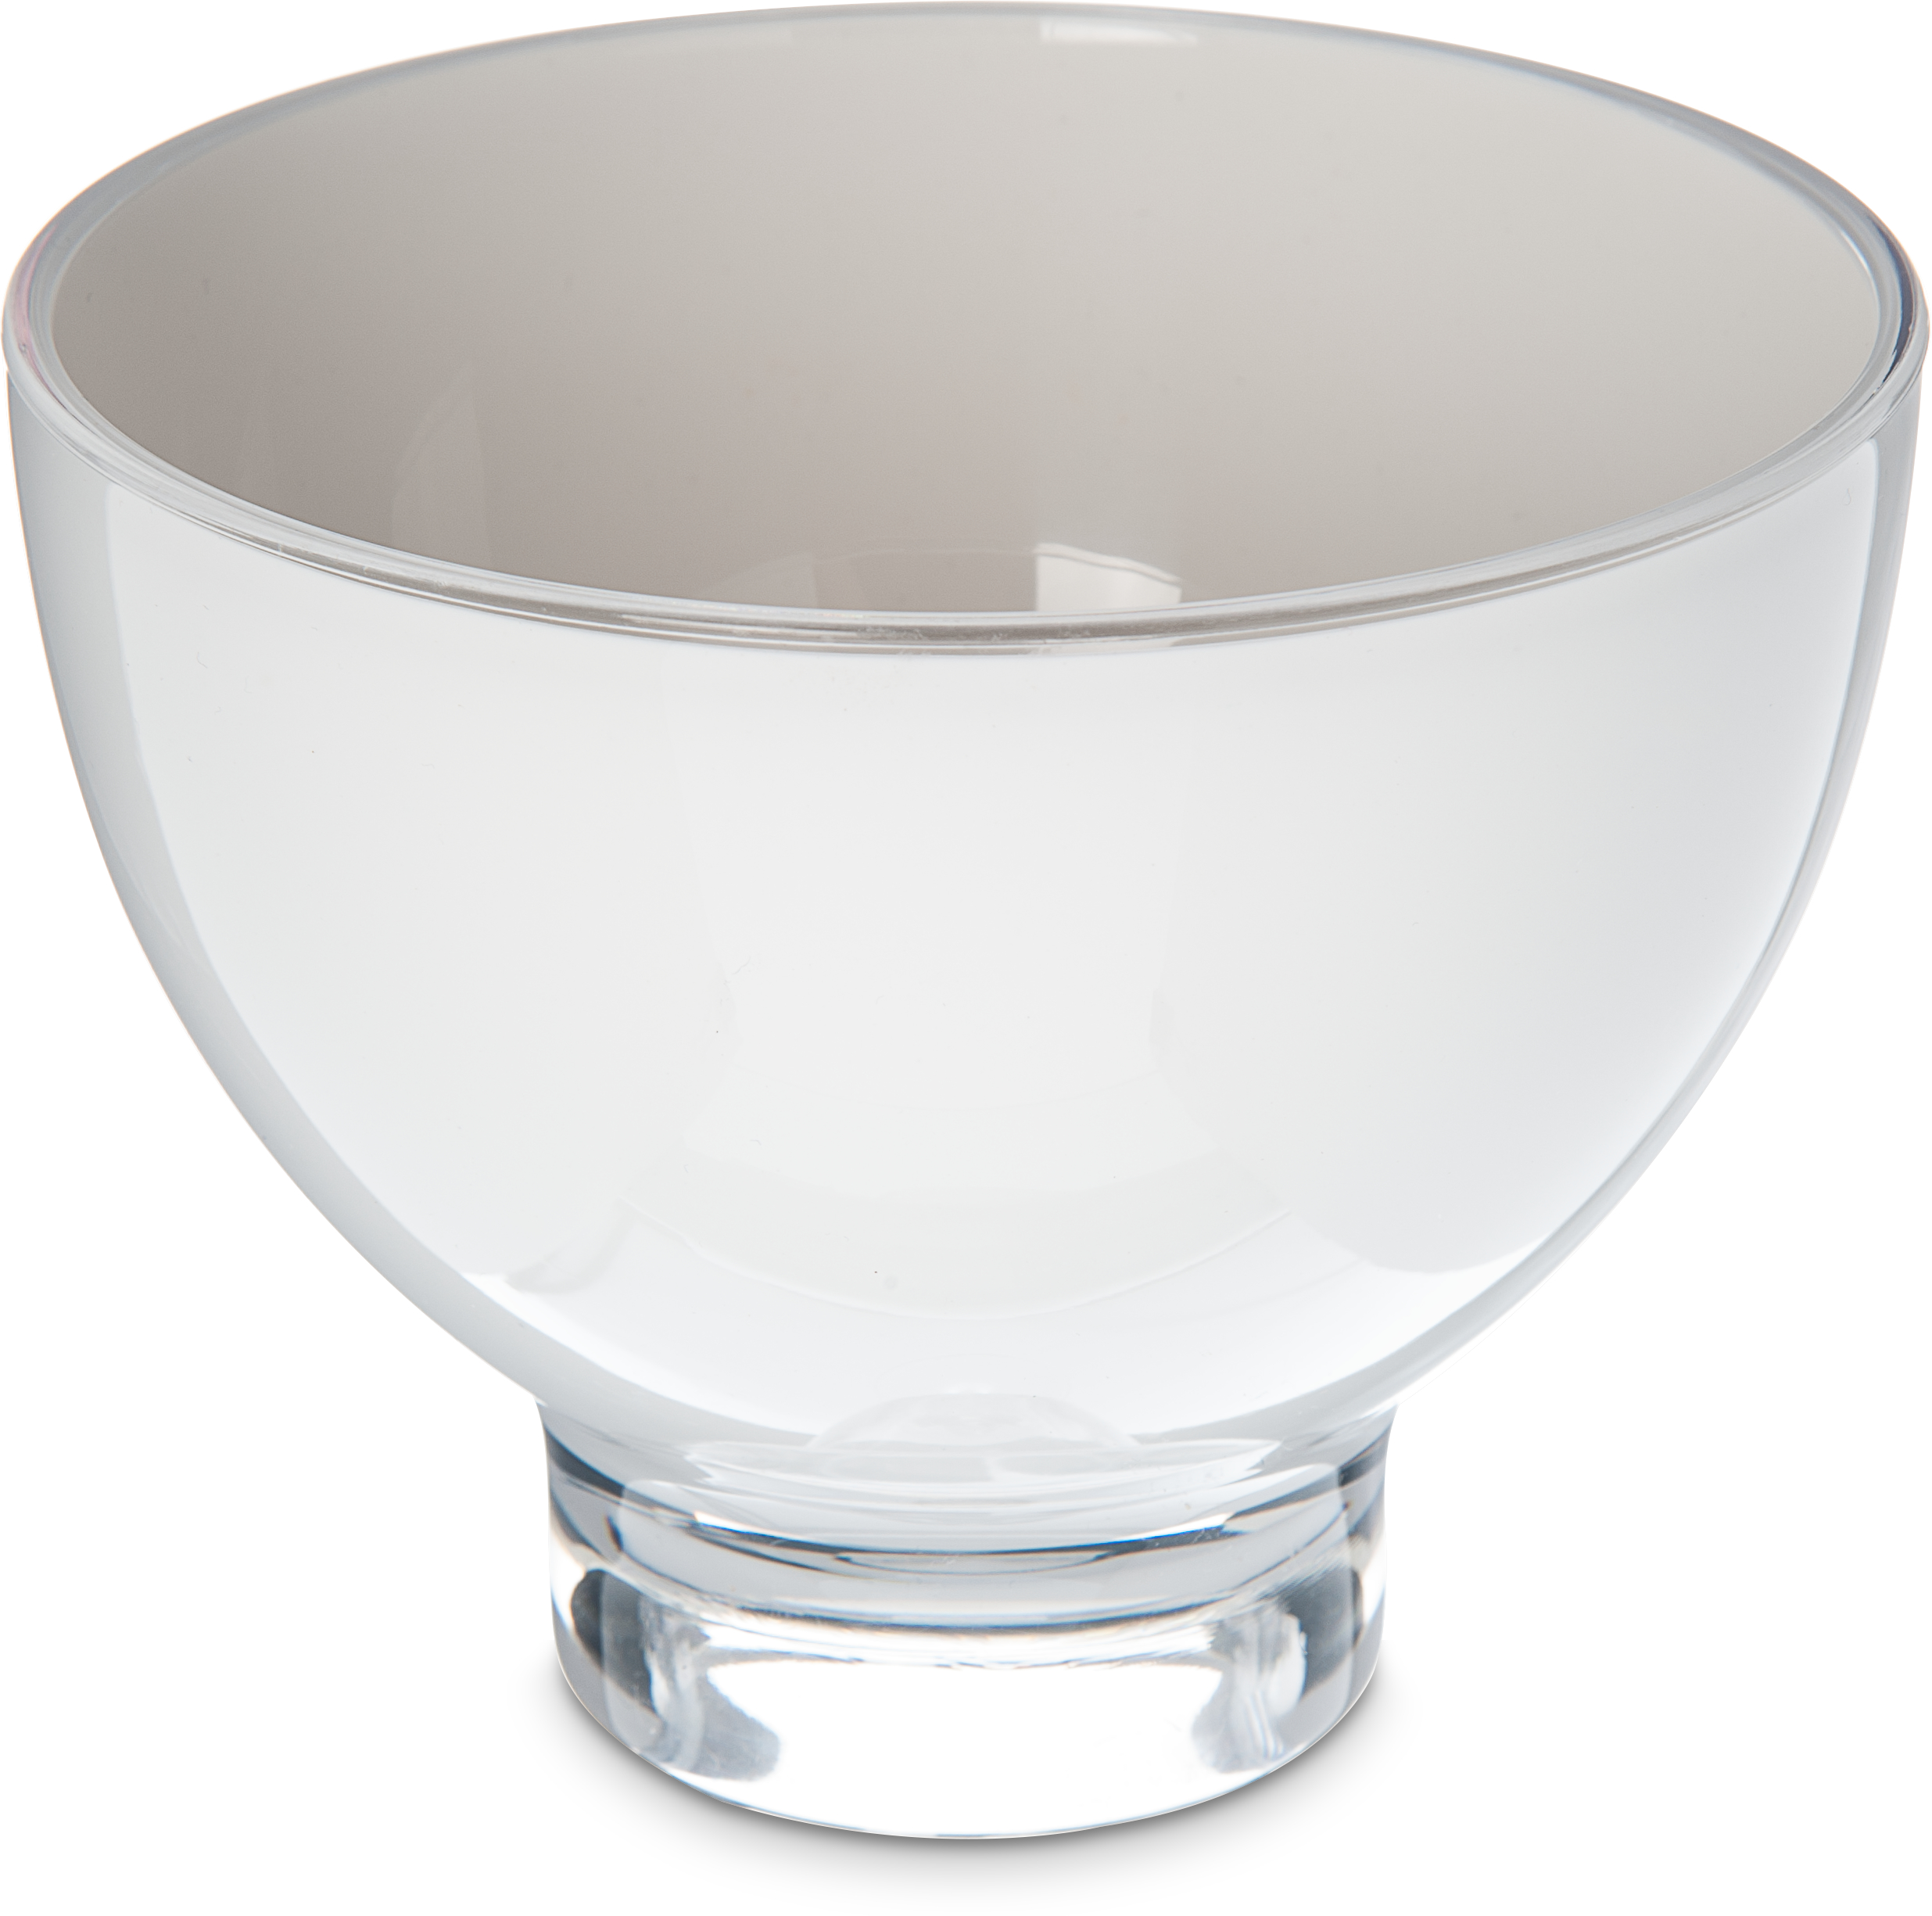 Epicure Small Cased Bowl 5.5 - White